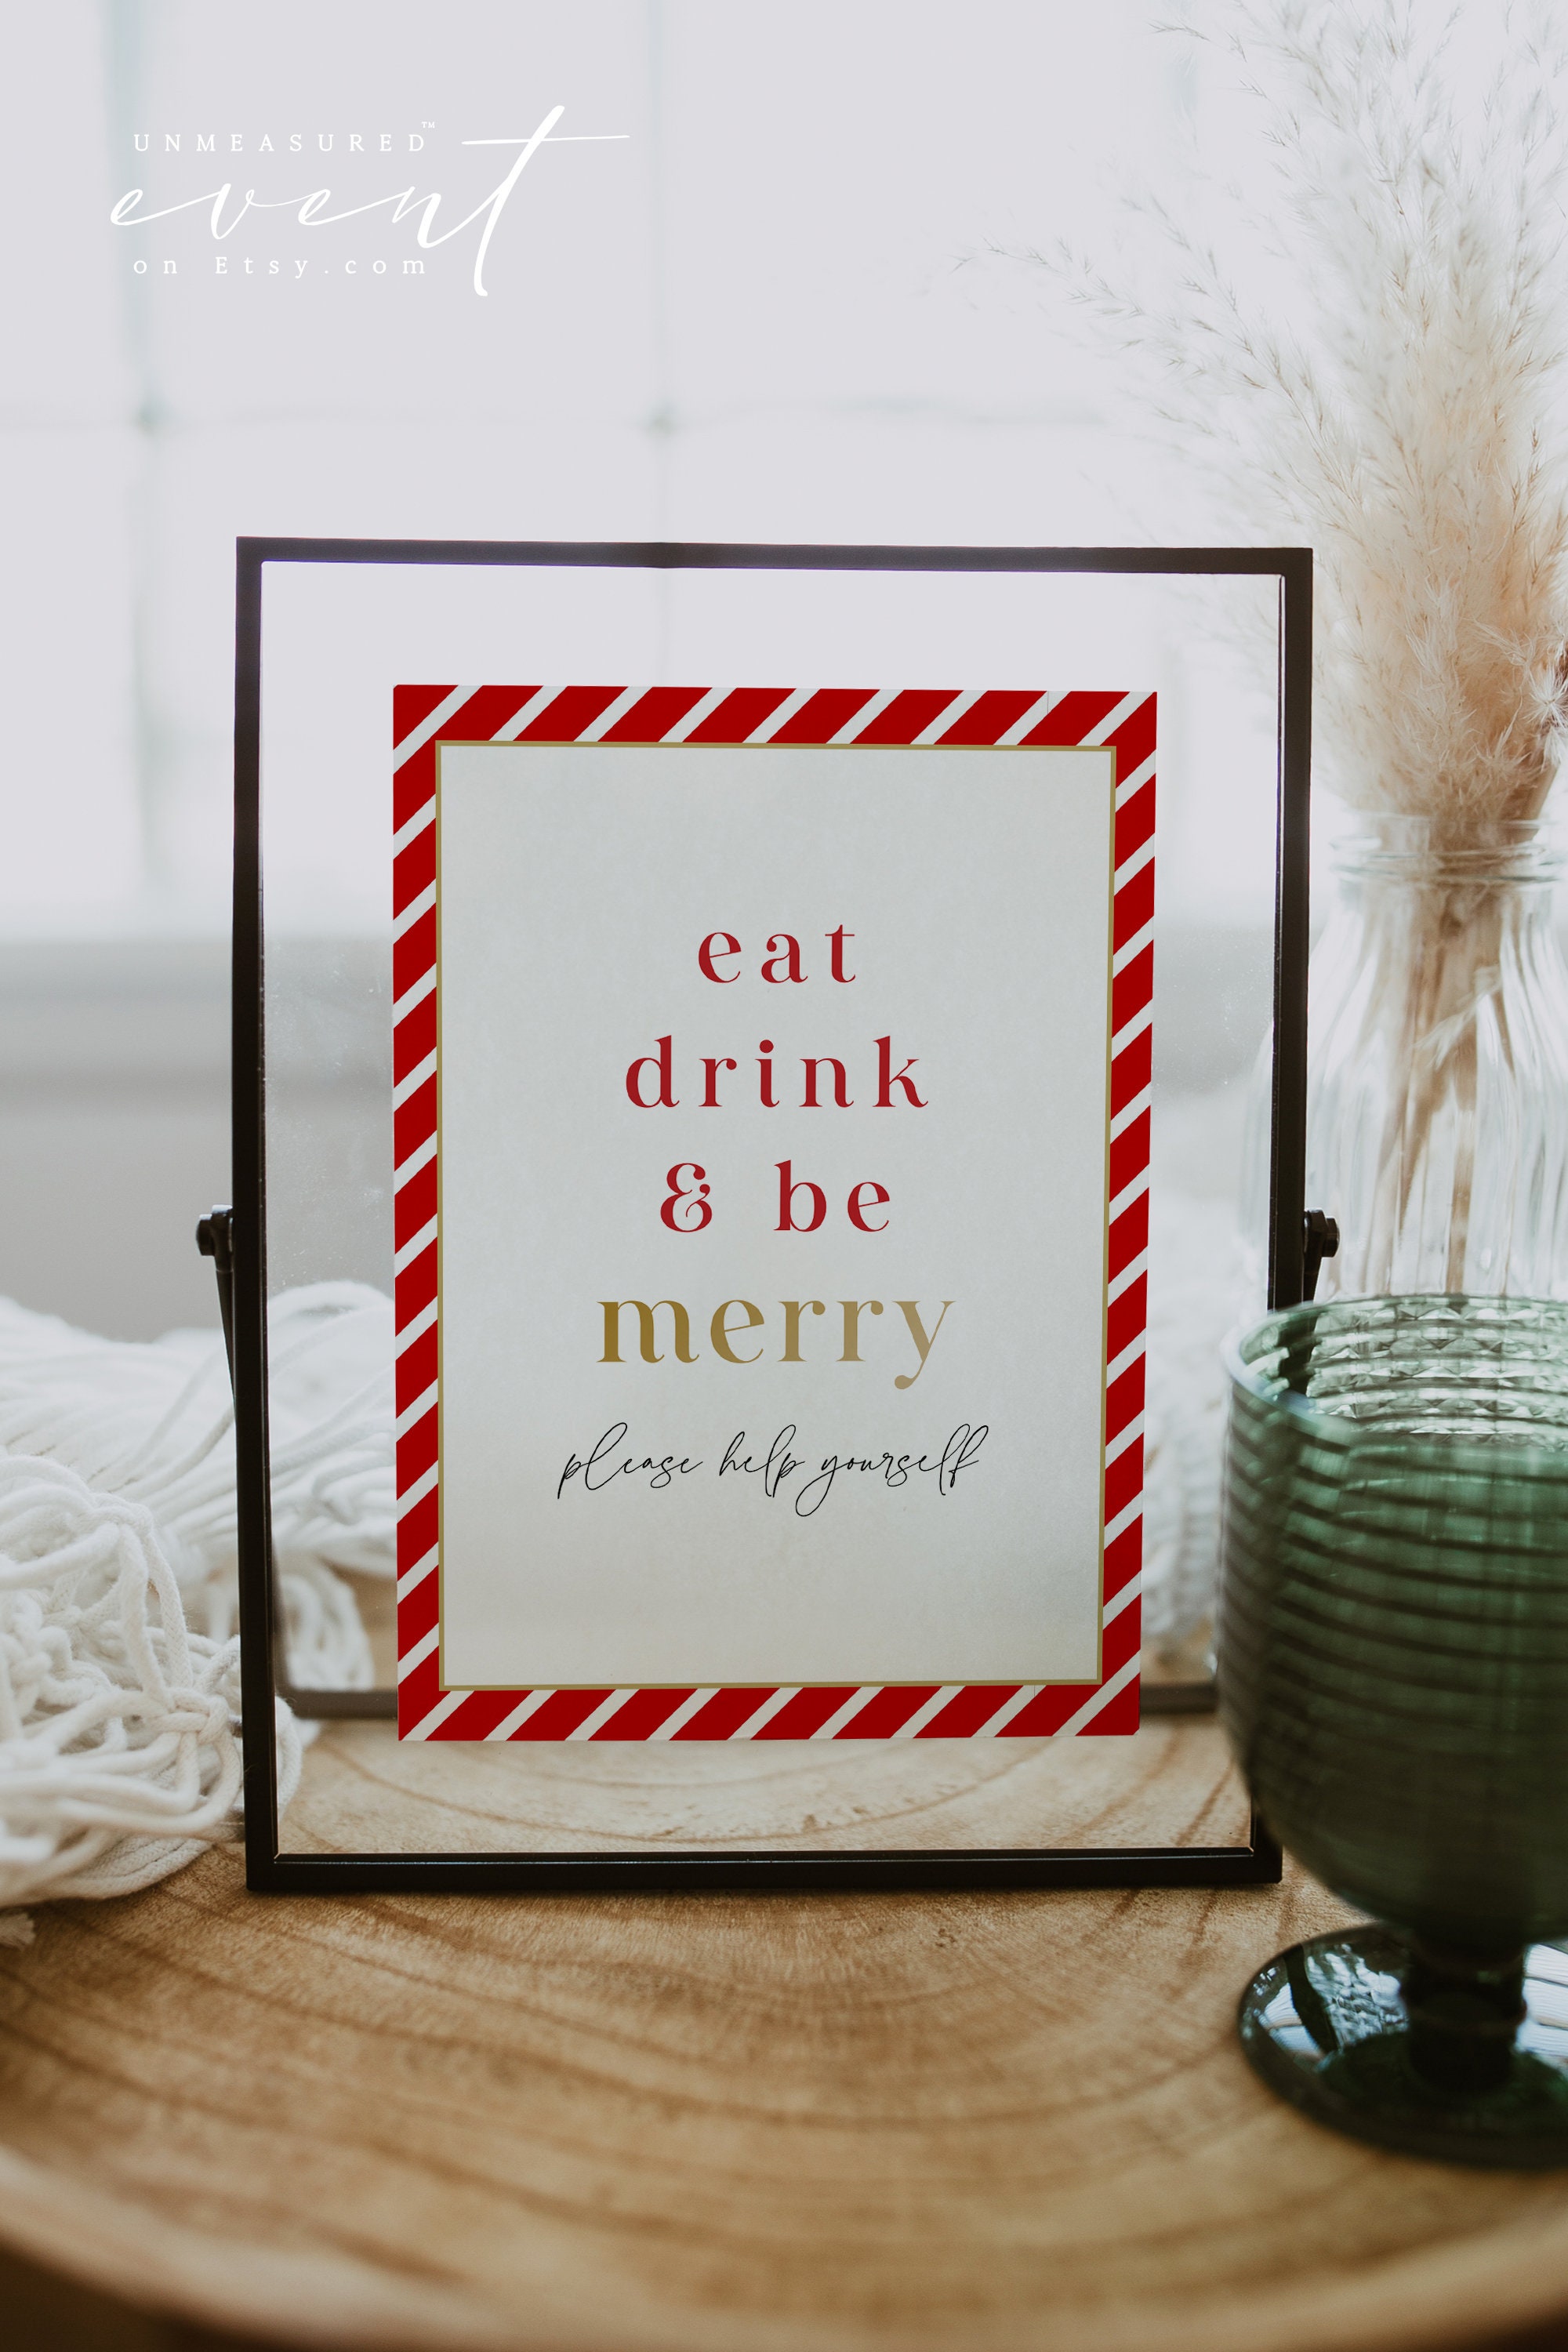 Eat drink & be merry: Beautiful Christmas Journal to write in Best Wishes  happy Christmas images Notebook, Blank Journal Christmas decorating ideas,   images Premium Graphics design (noel gifts)